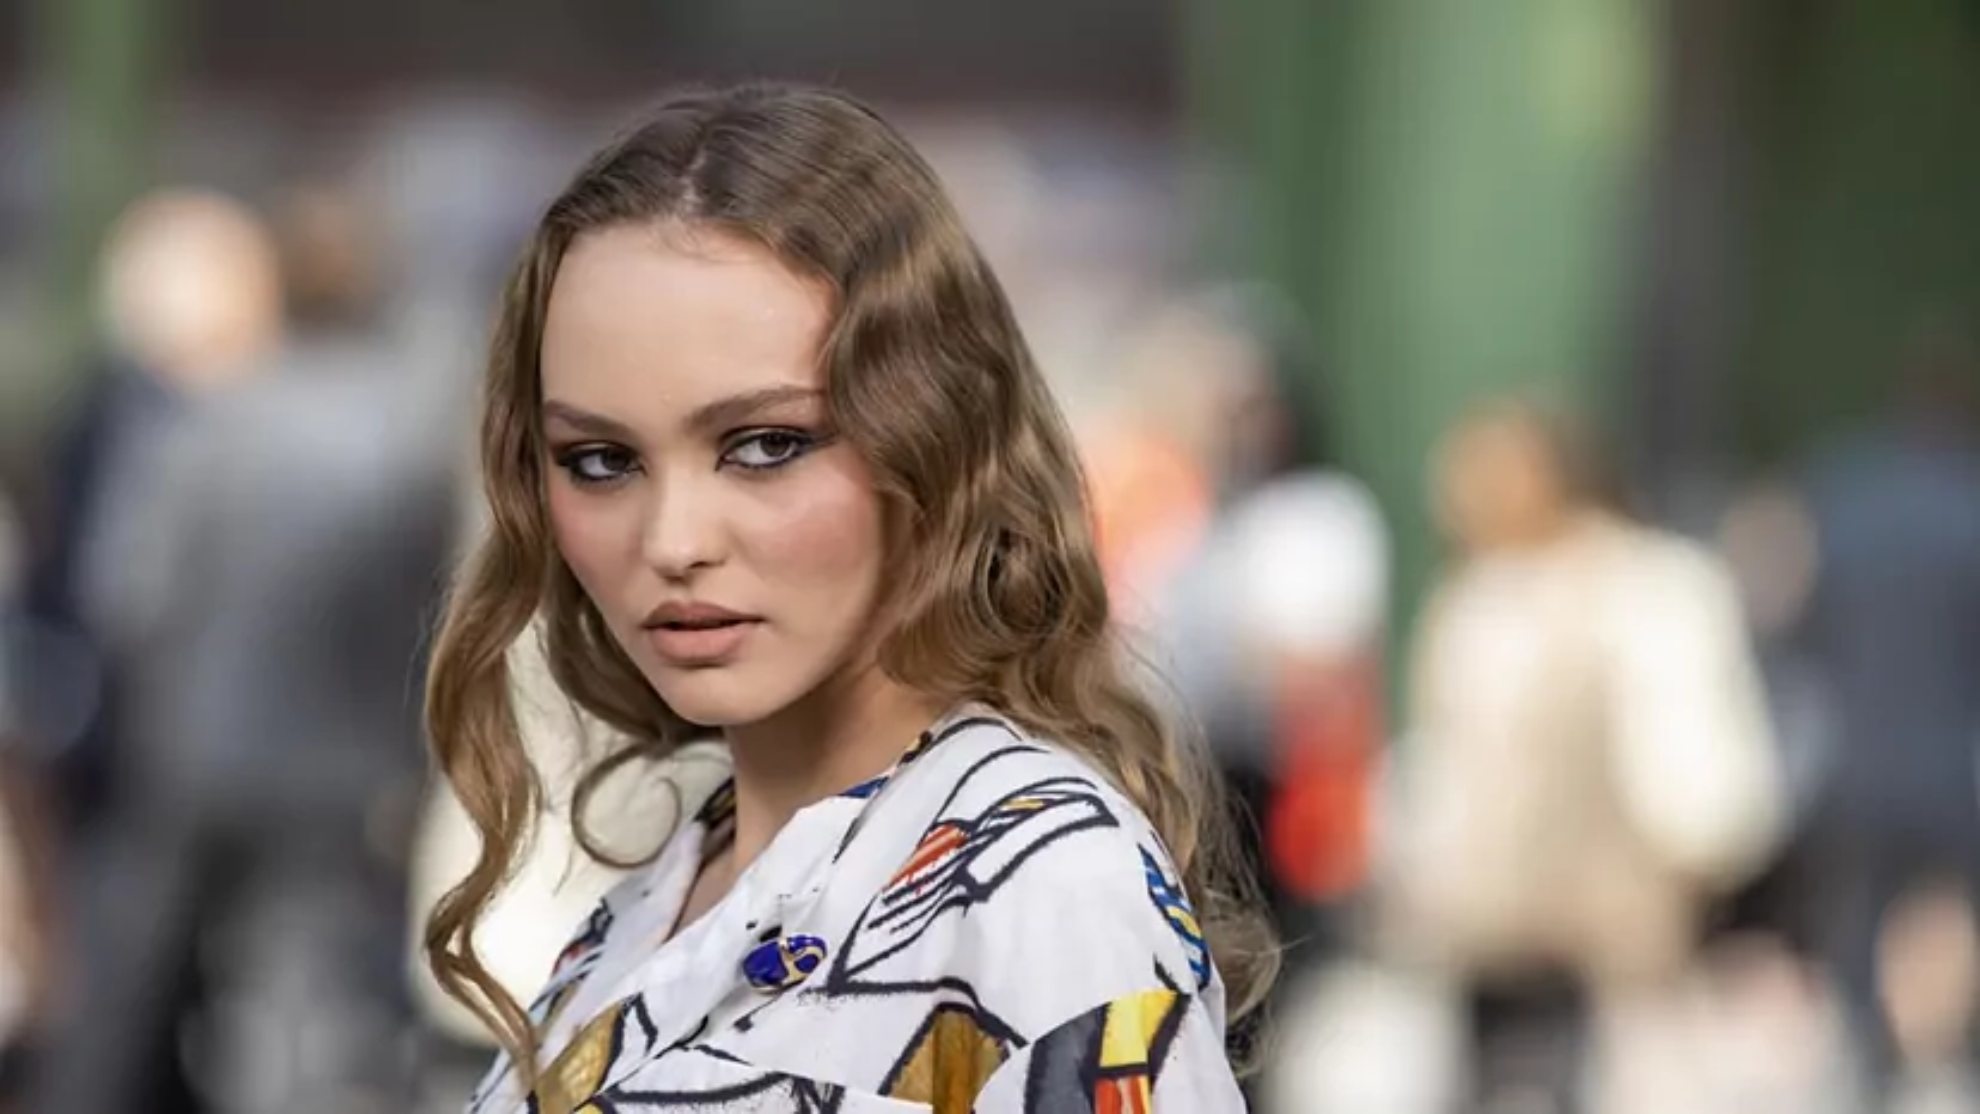 Lily-Rose Depp has decided to step away from all media focus